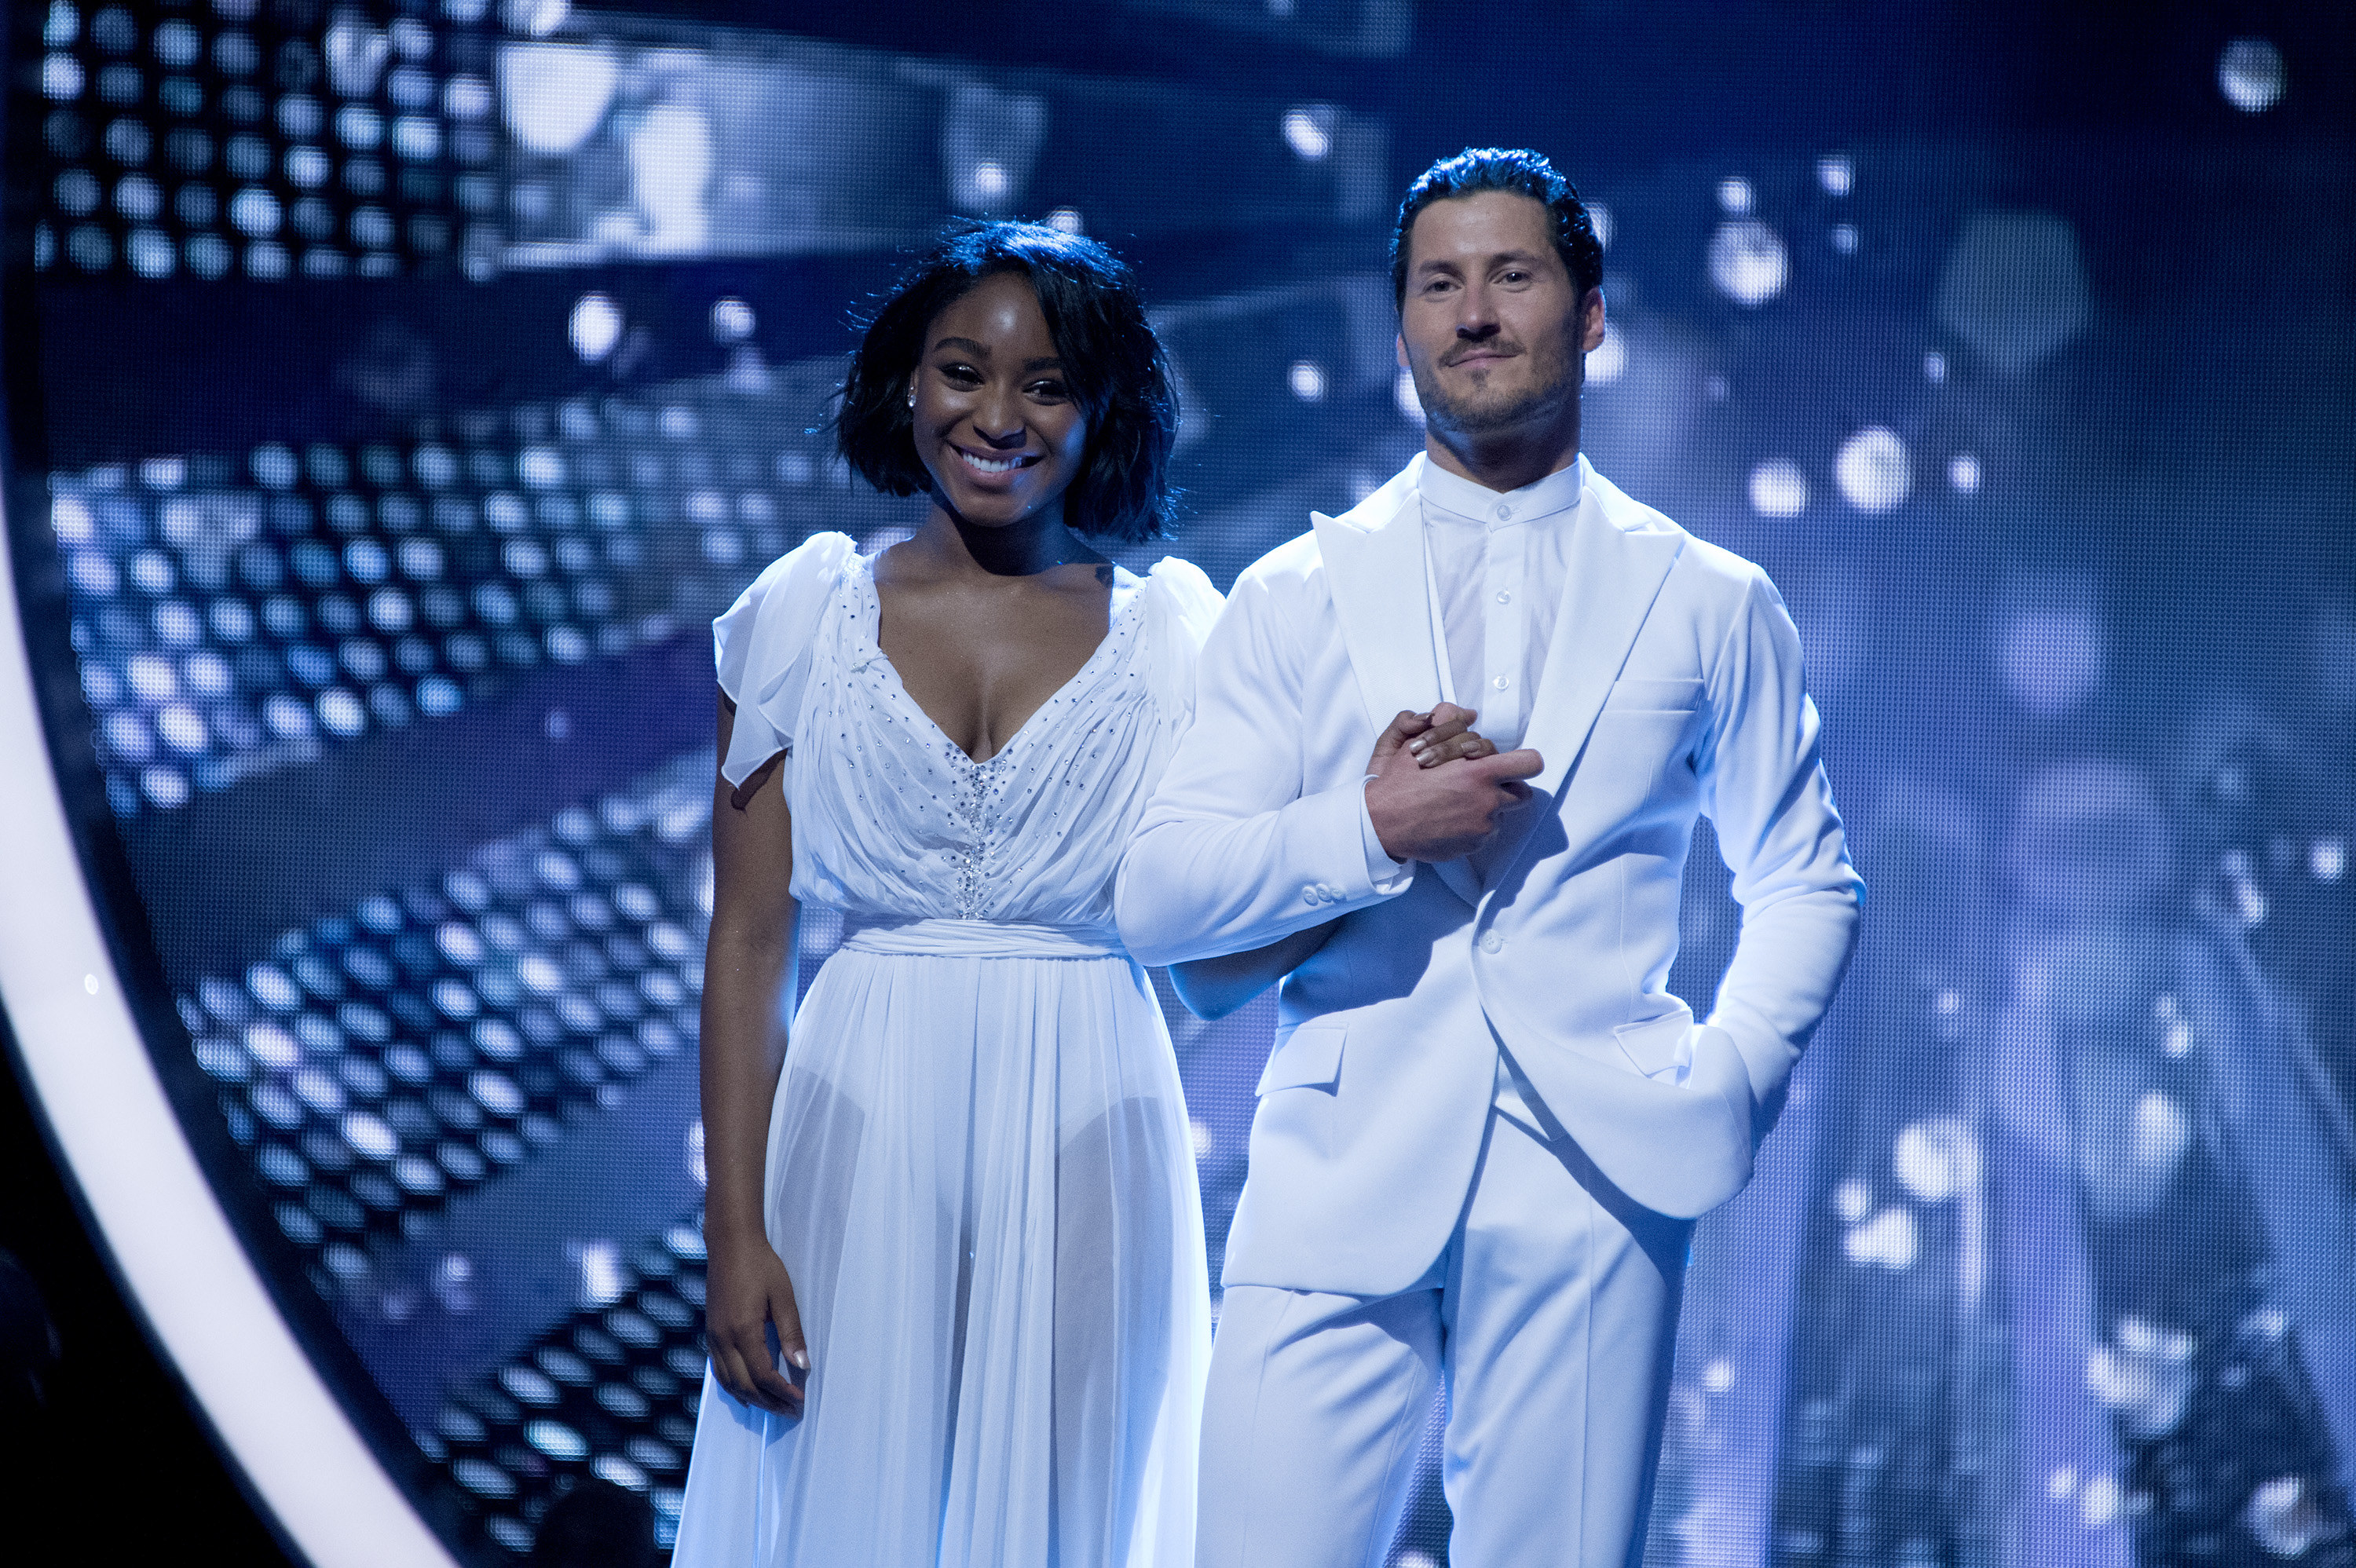 Normani Kordei and Valentin Chmerkovskiy on Dancing with the Stars